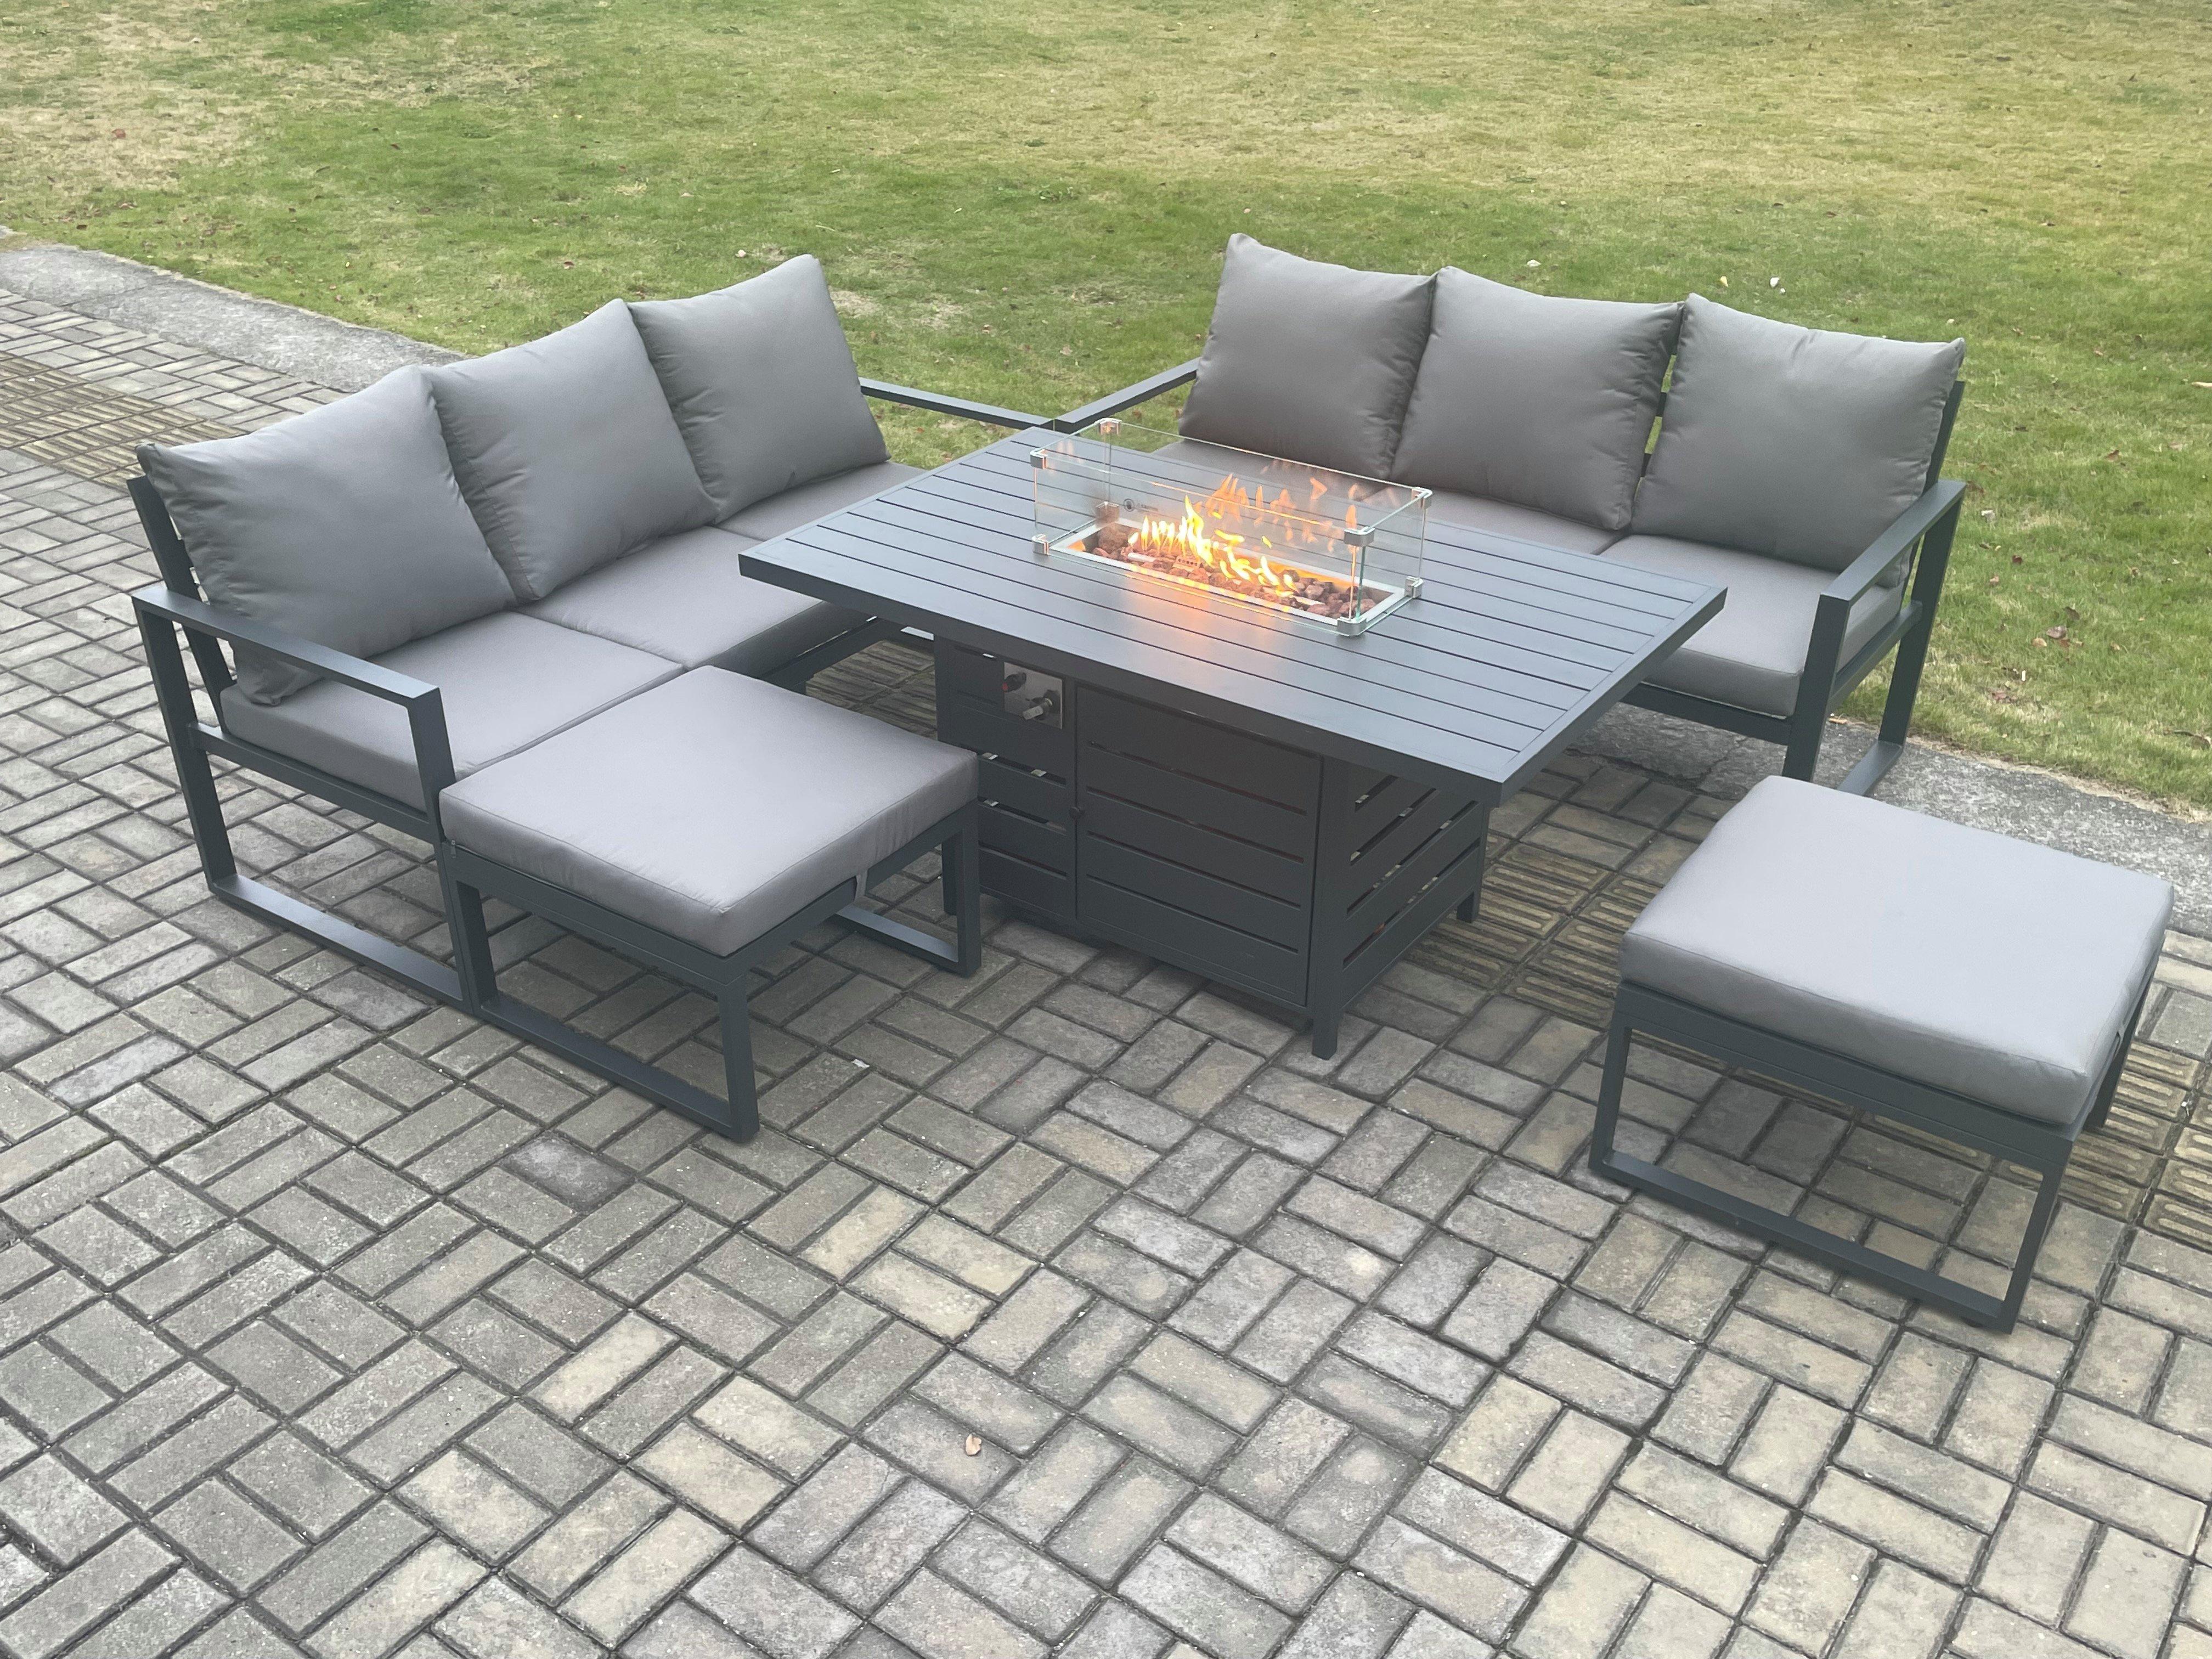 Aluminium 8 Seater Outdoor Garden Furniture Lounge Sofa Set Gas Fire Pit Dining Table with 2 Big Foo